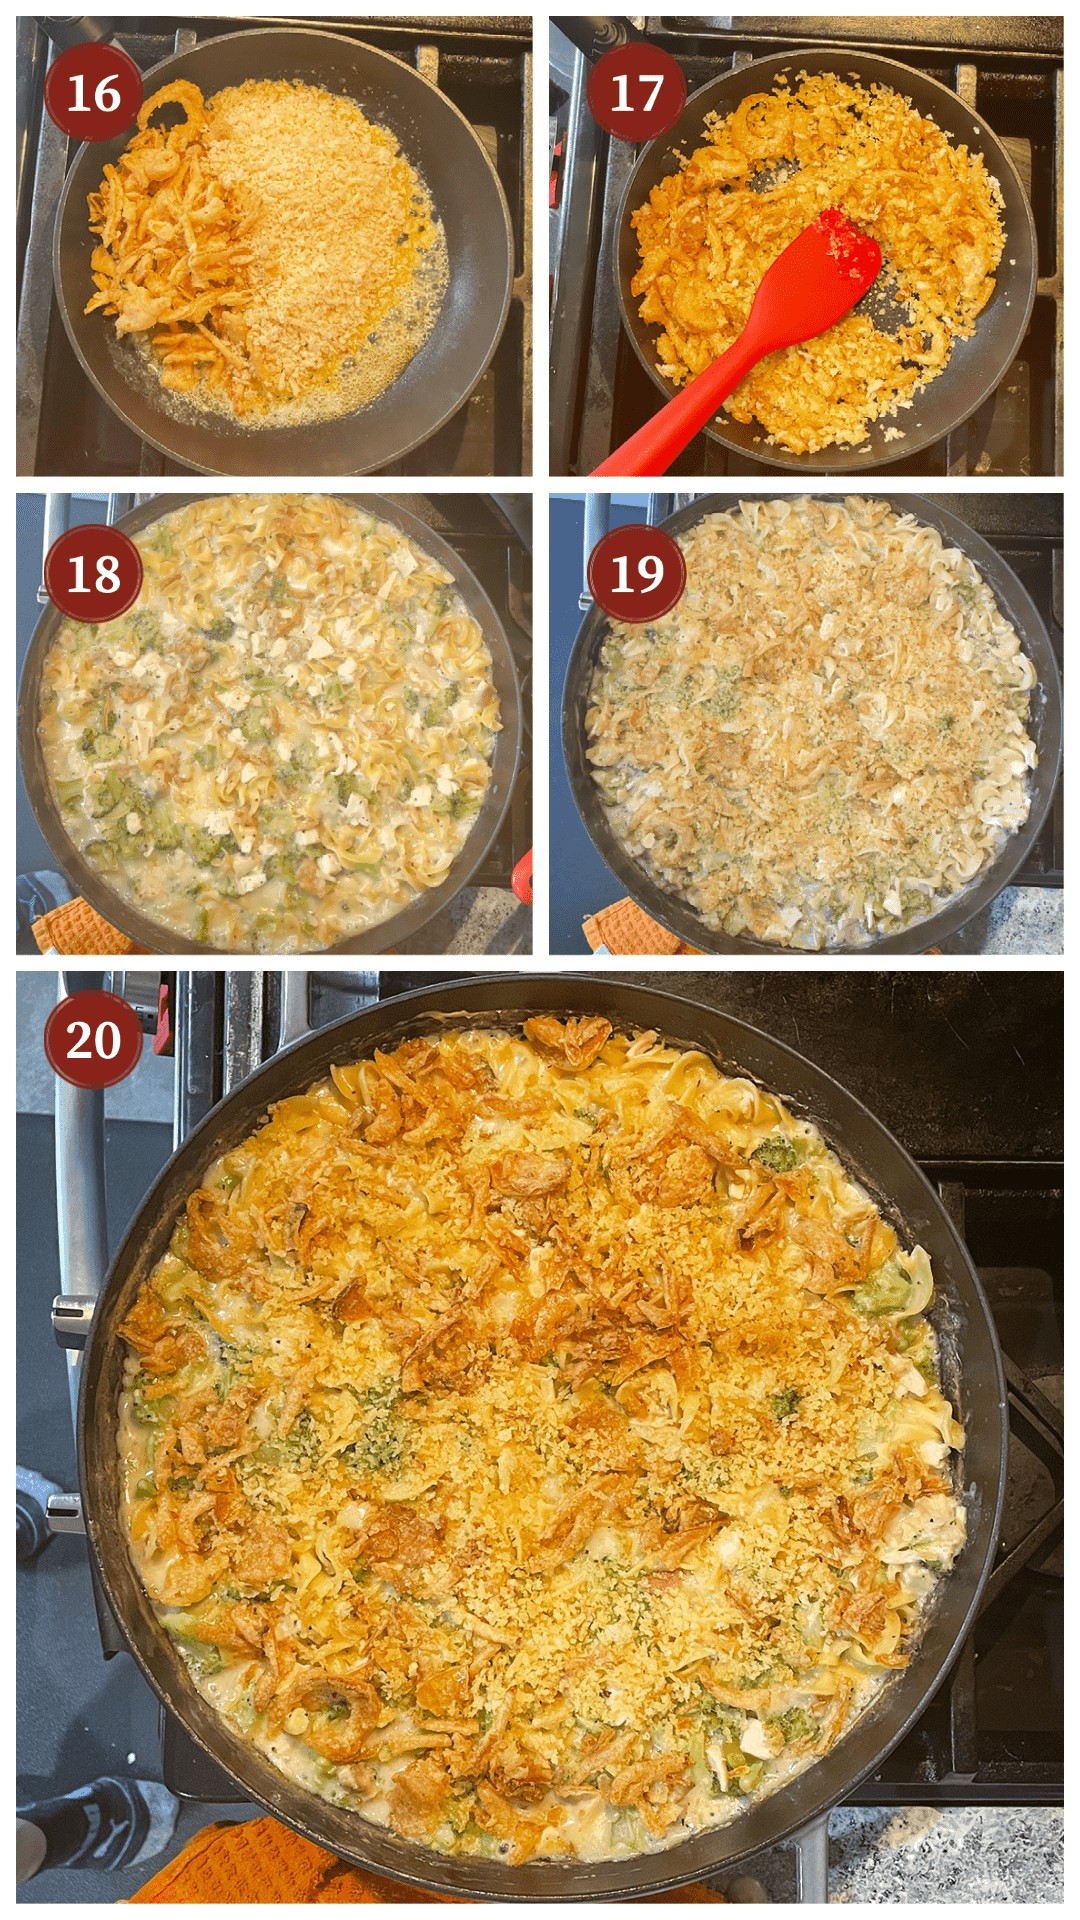 A collage of images showing how to make cheesy chicken broccoli noodle casserole, steps 16 - 20.